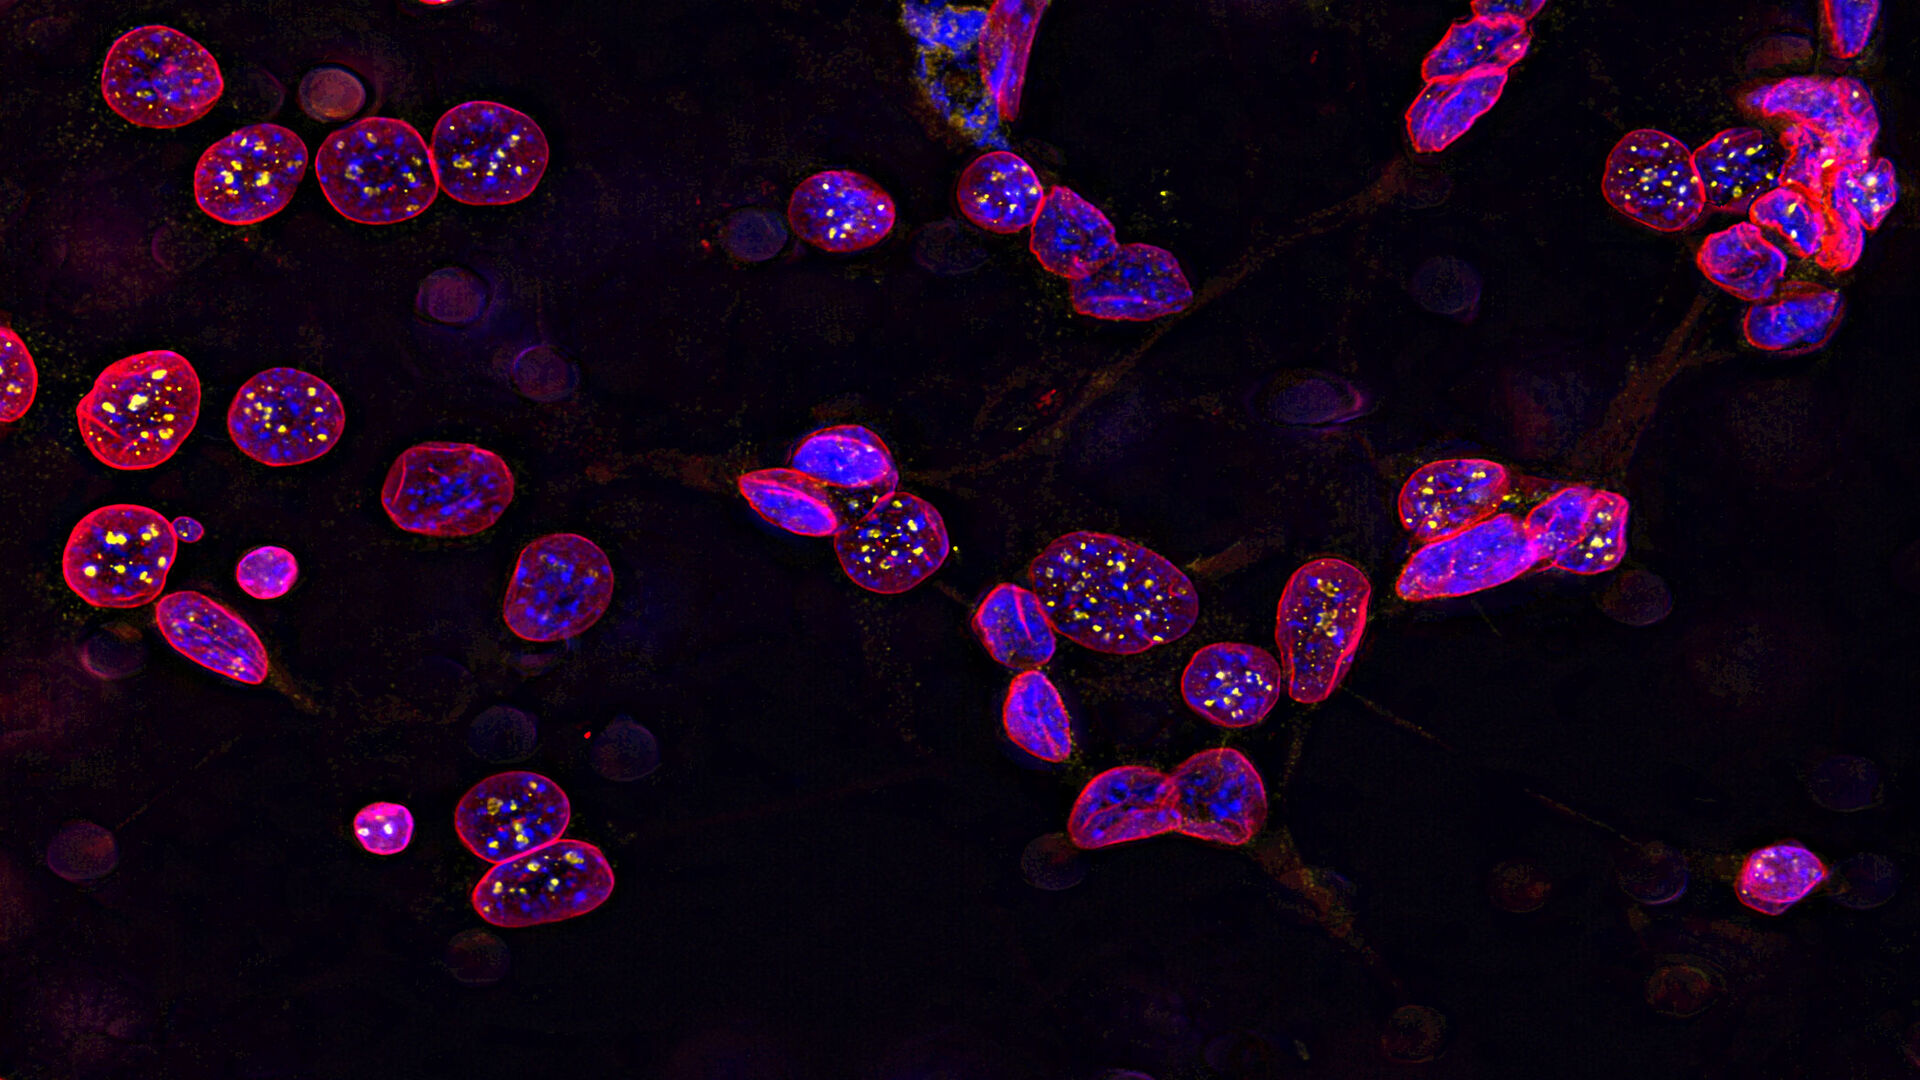 Image of C2C12 cells: The cells are stained with lamin B (magenta) which indicates nuclear structure, Hoechst (blue) indicating DNA, and γH2AX (yellow) indicating damage to DNA. Cells were imaged using a THUNDER Imager 3D Live Cell with a 63X/1.4 oil immersion objective.